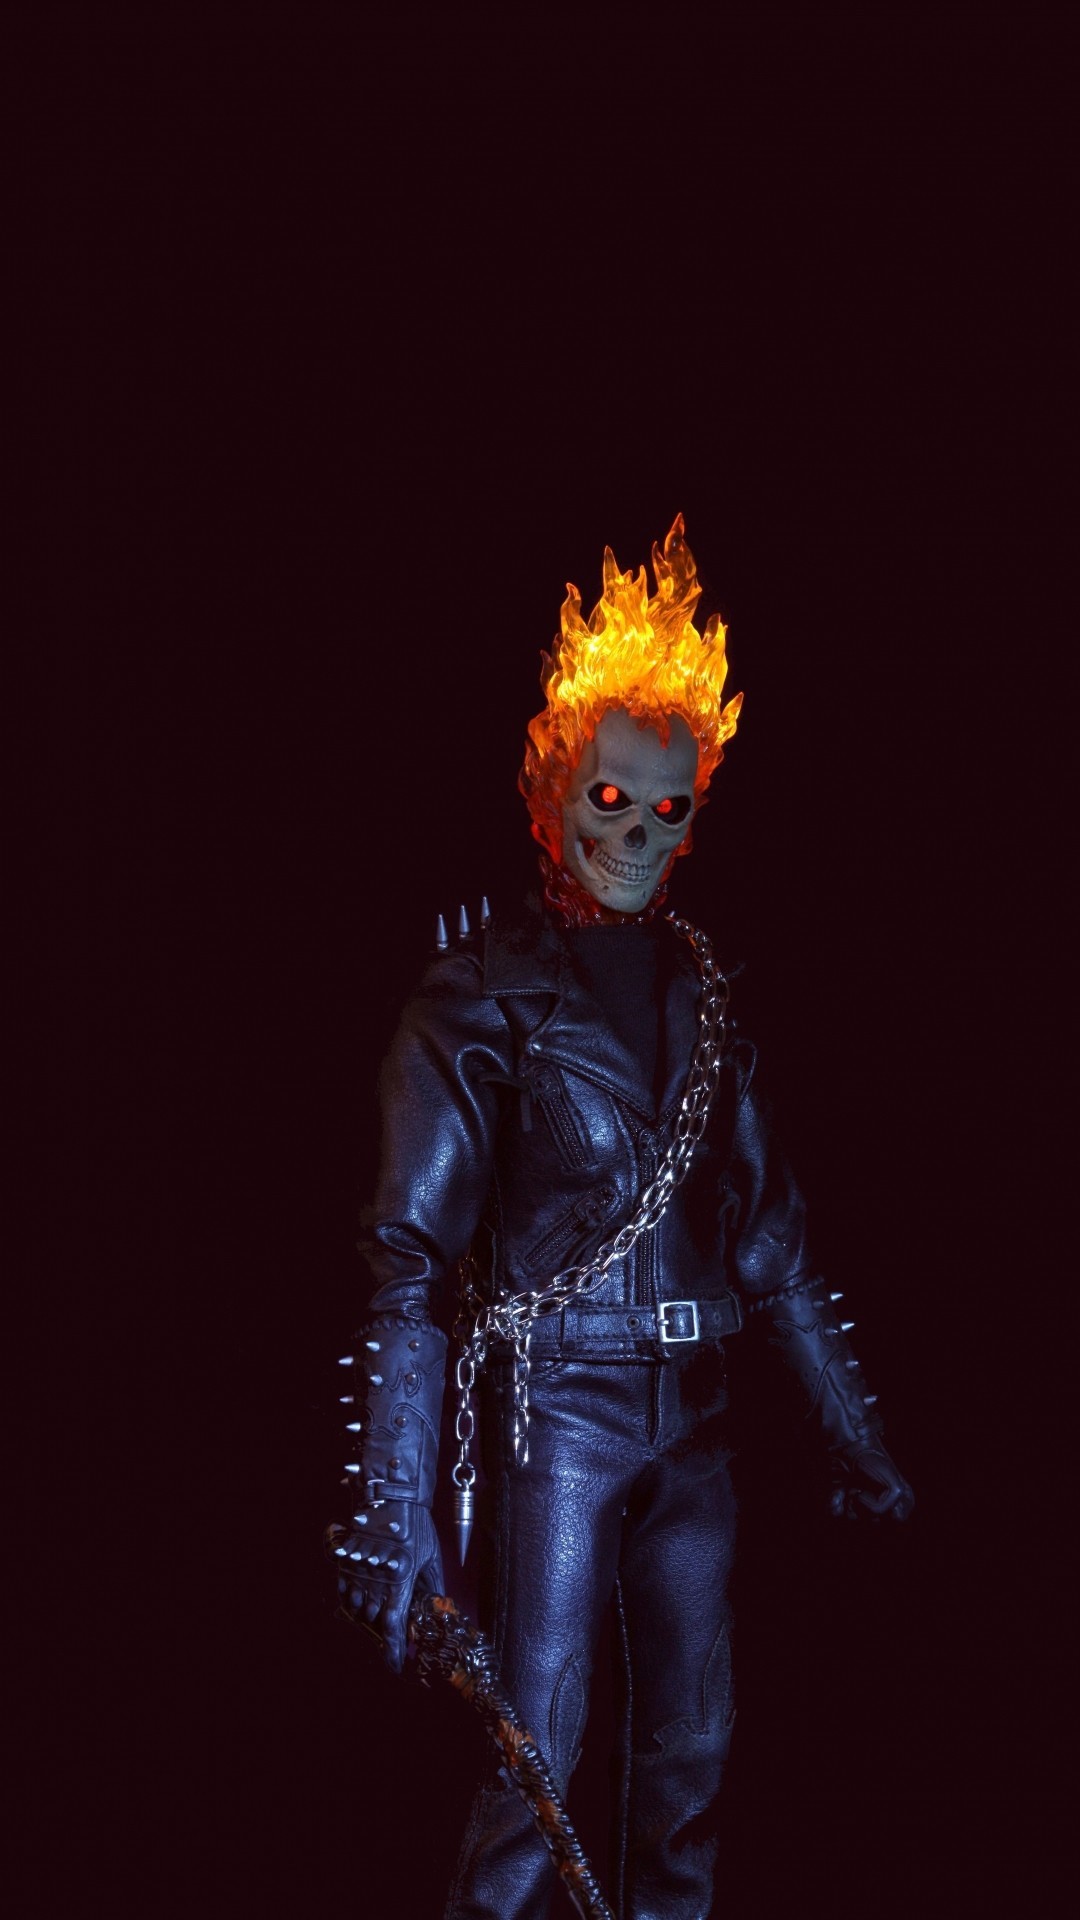 1080x1920, Ghost Rider Mobile Wallpapers 1080p For - Wallpaper - 1080x1920  Wallpaper 